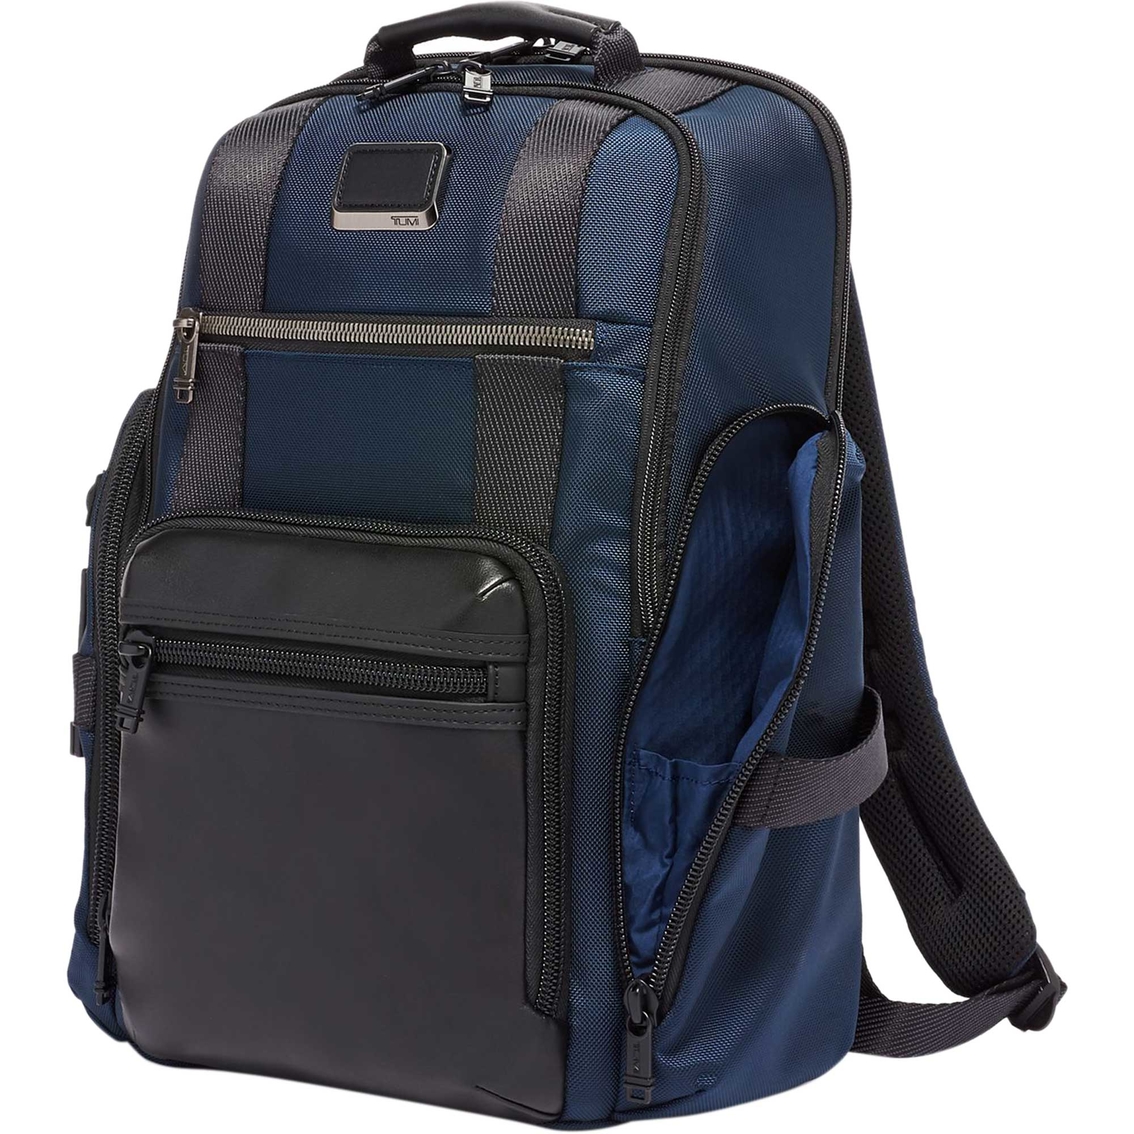 Tumi Alpha Bravo Sheppard Deluxe Backpack | Backpacks | Clothing ...